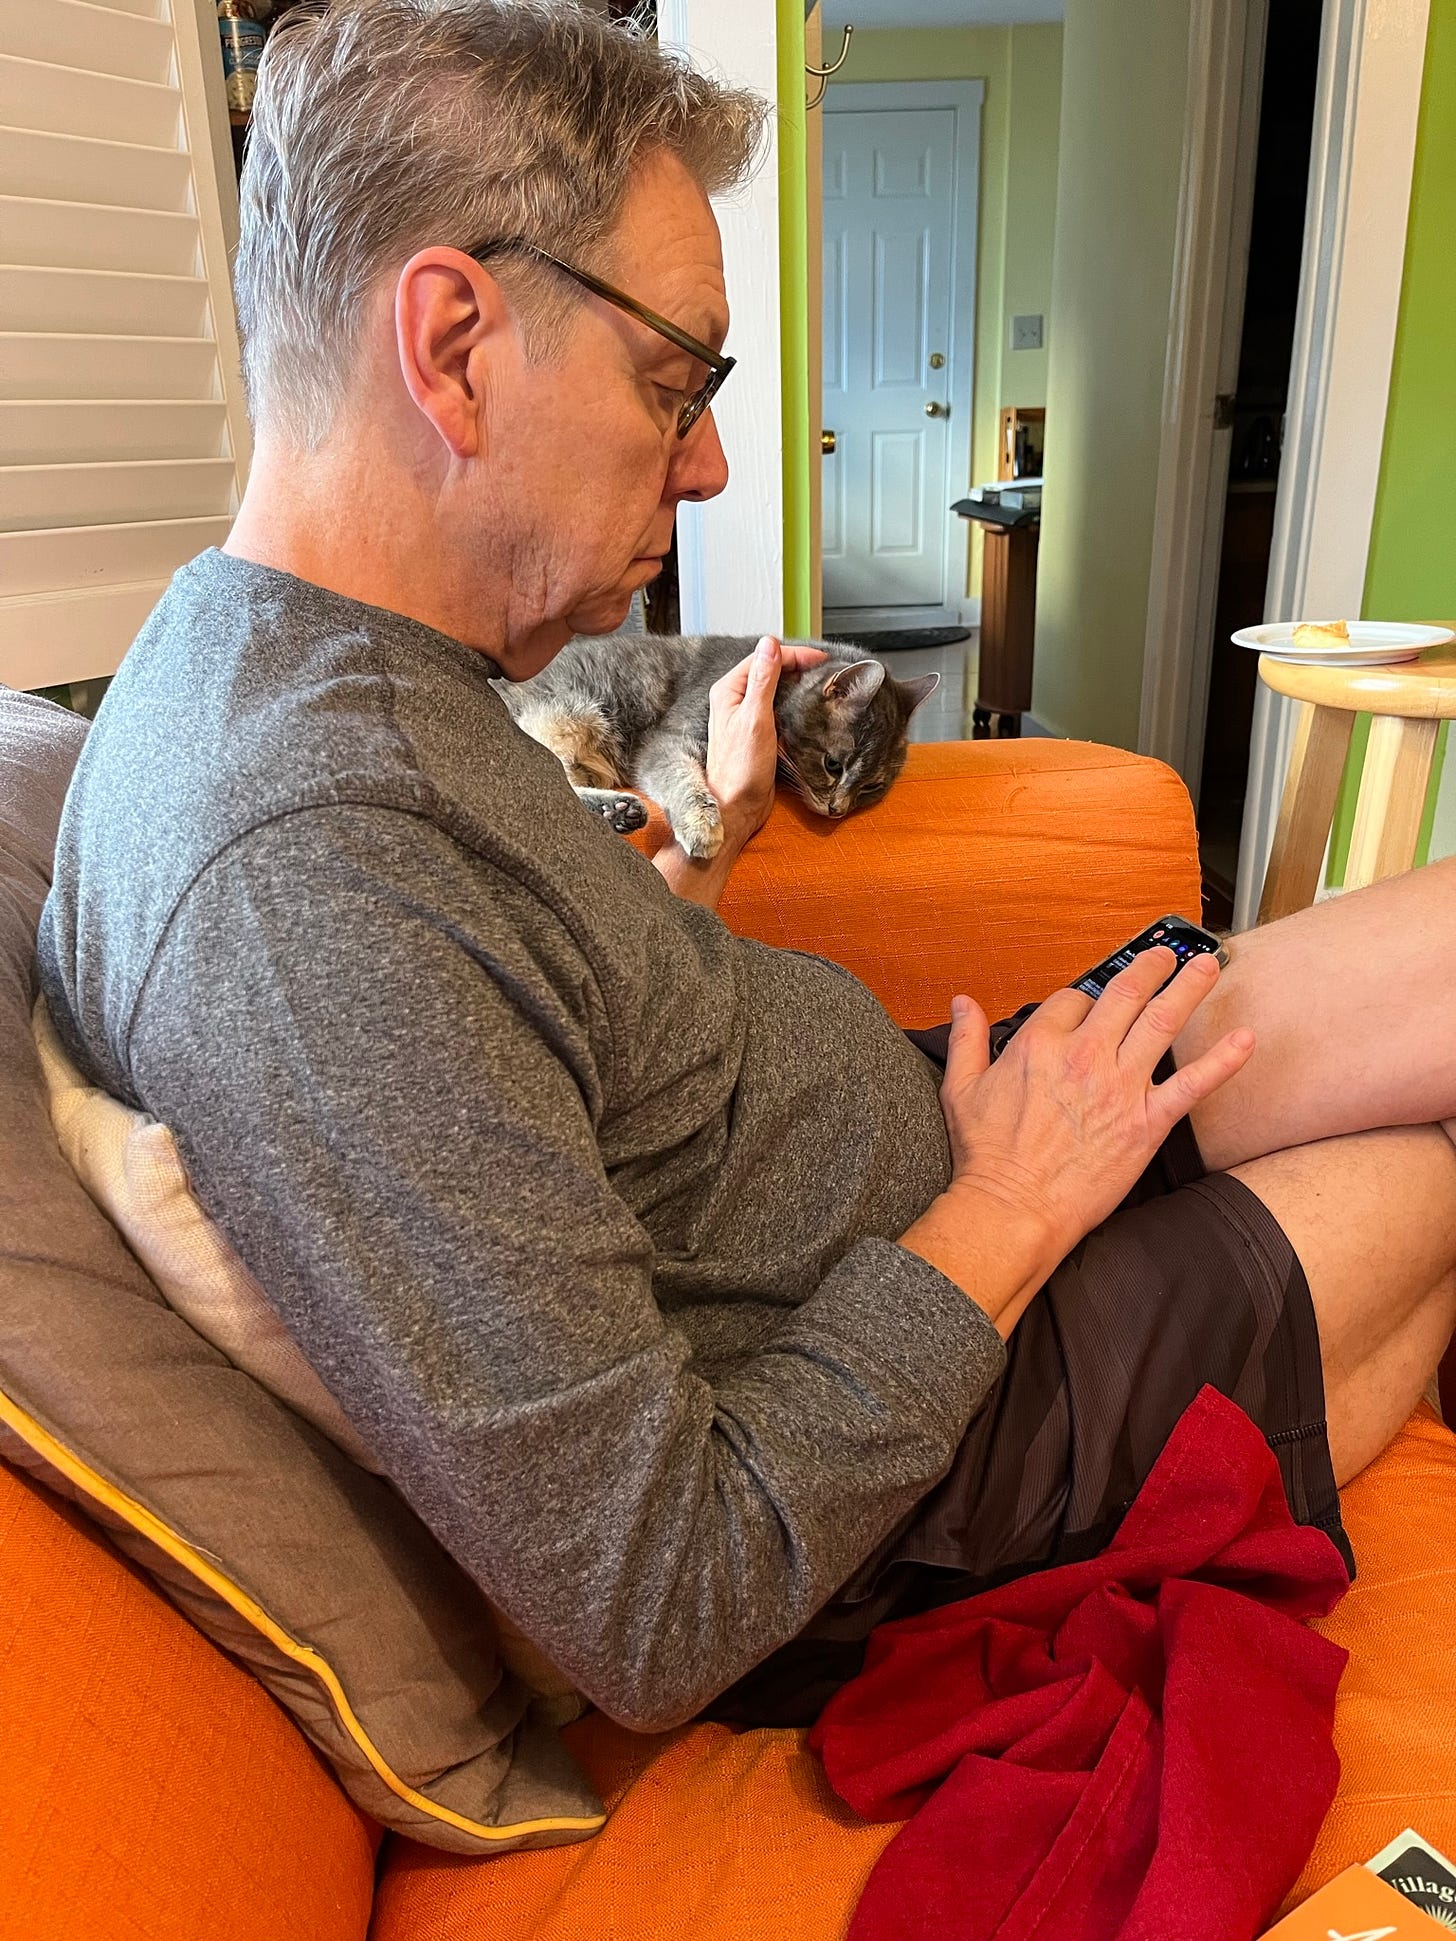 Jeff, sitting on a couch, looking at his phone in his lap, while his other hand is curled around our cat Gilly, who is sitting on the arm of the couch